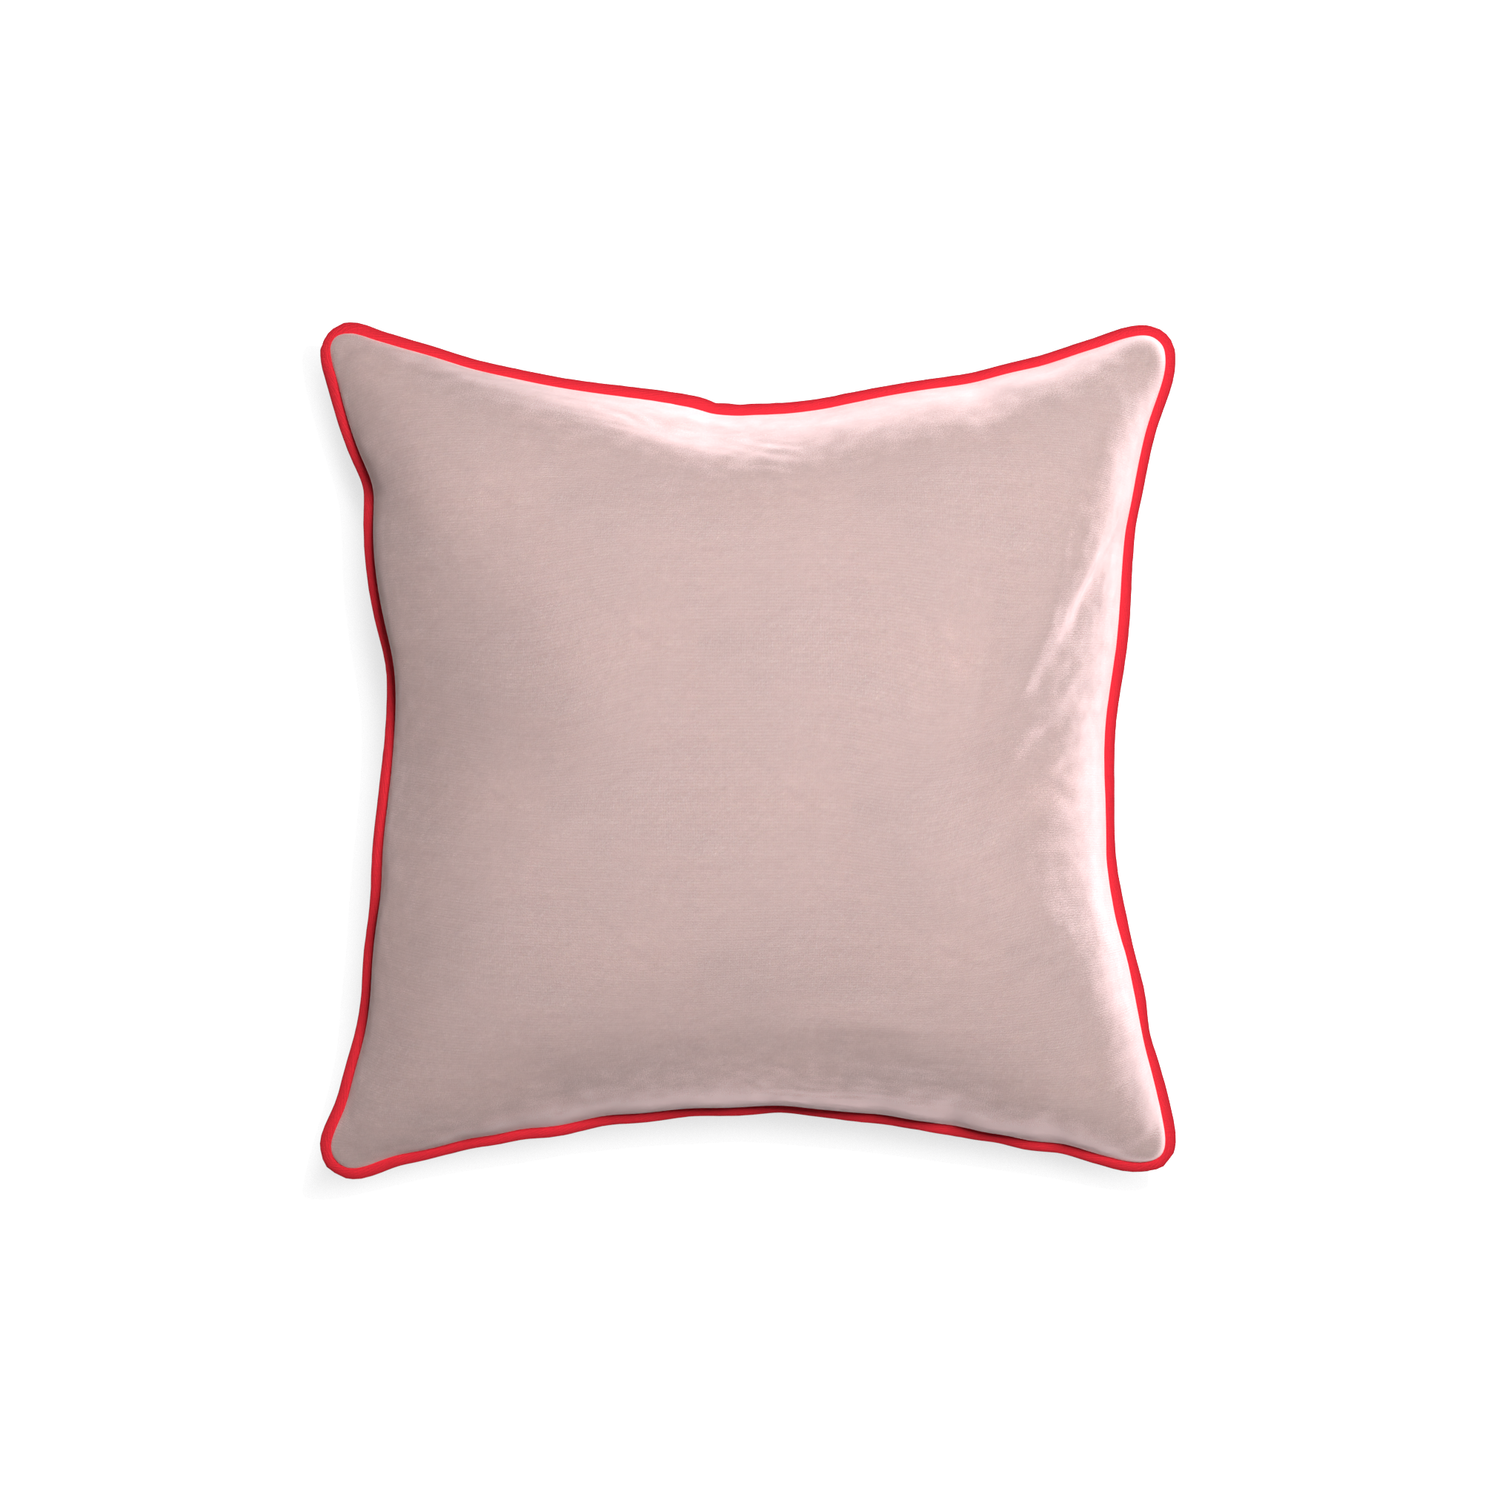 square light pink velvet pillow with red piping